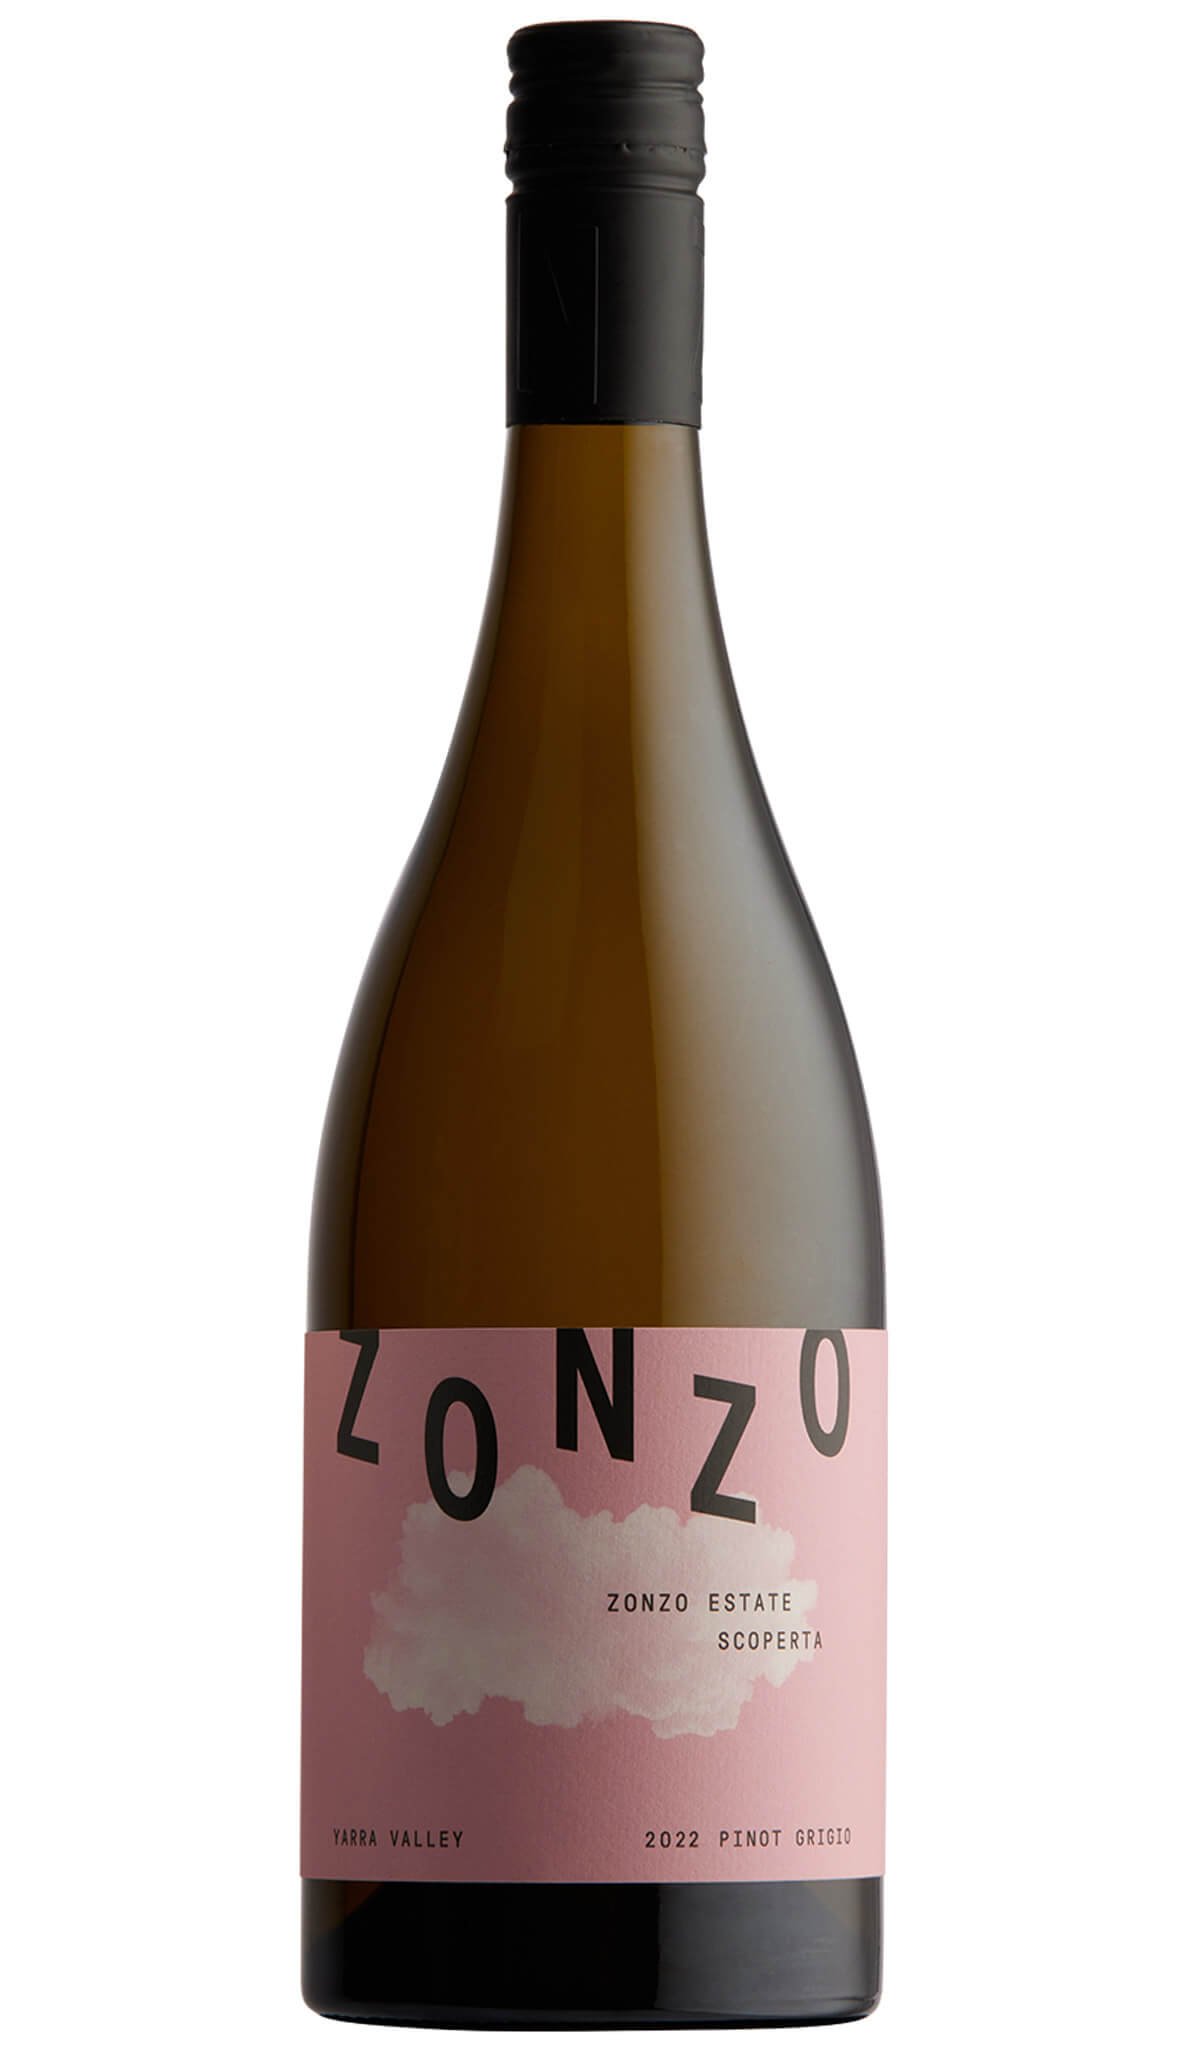 Find out more, explore the range and purchase Zonzo Estate Scoperta Pinot Grigio 2022 (Yarra Valley) available online at Wine Sellers Direct - Australia's independent liquor specialists.